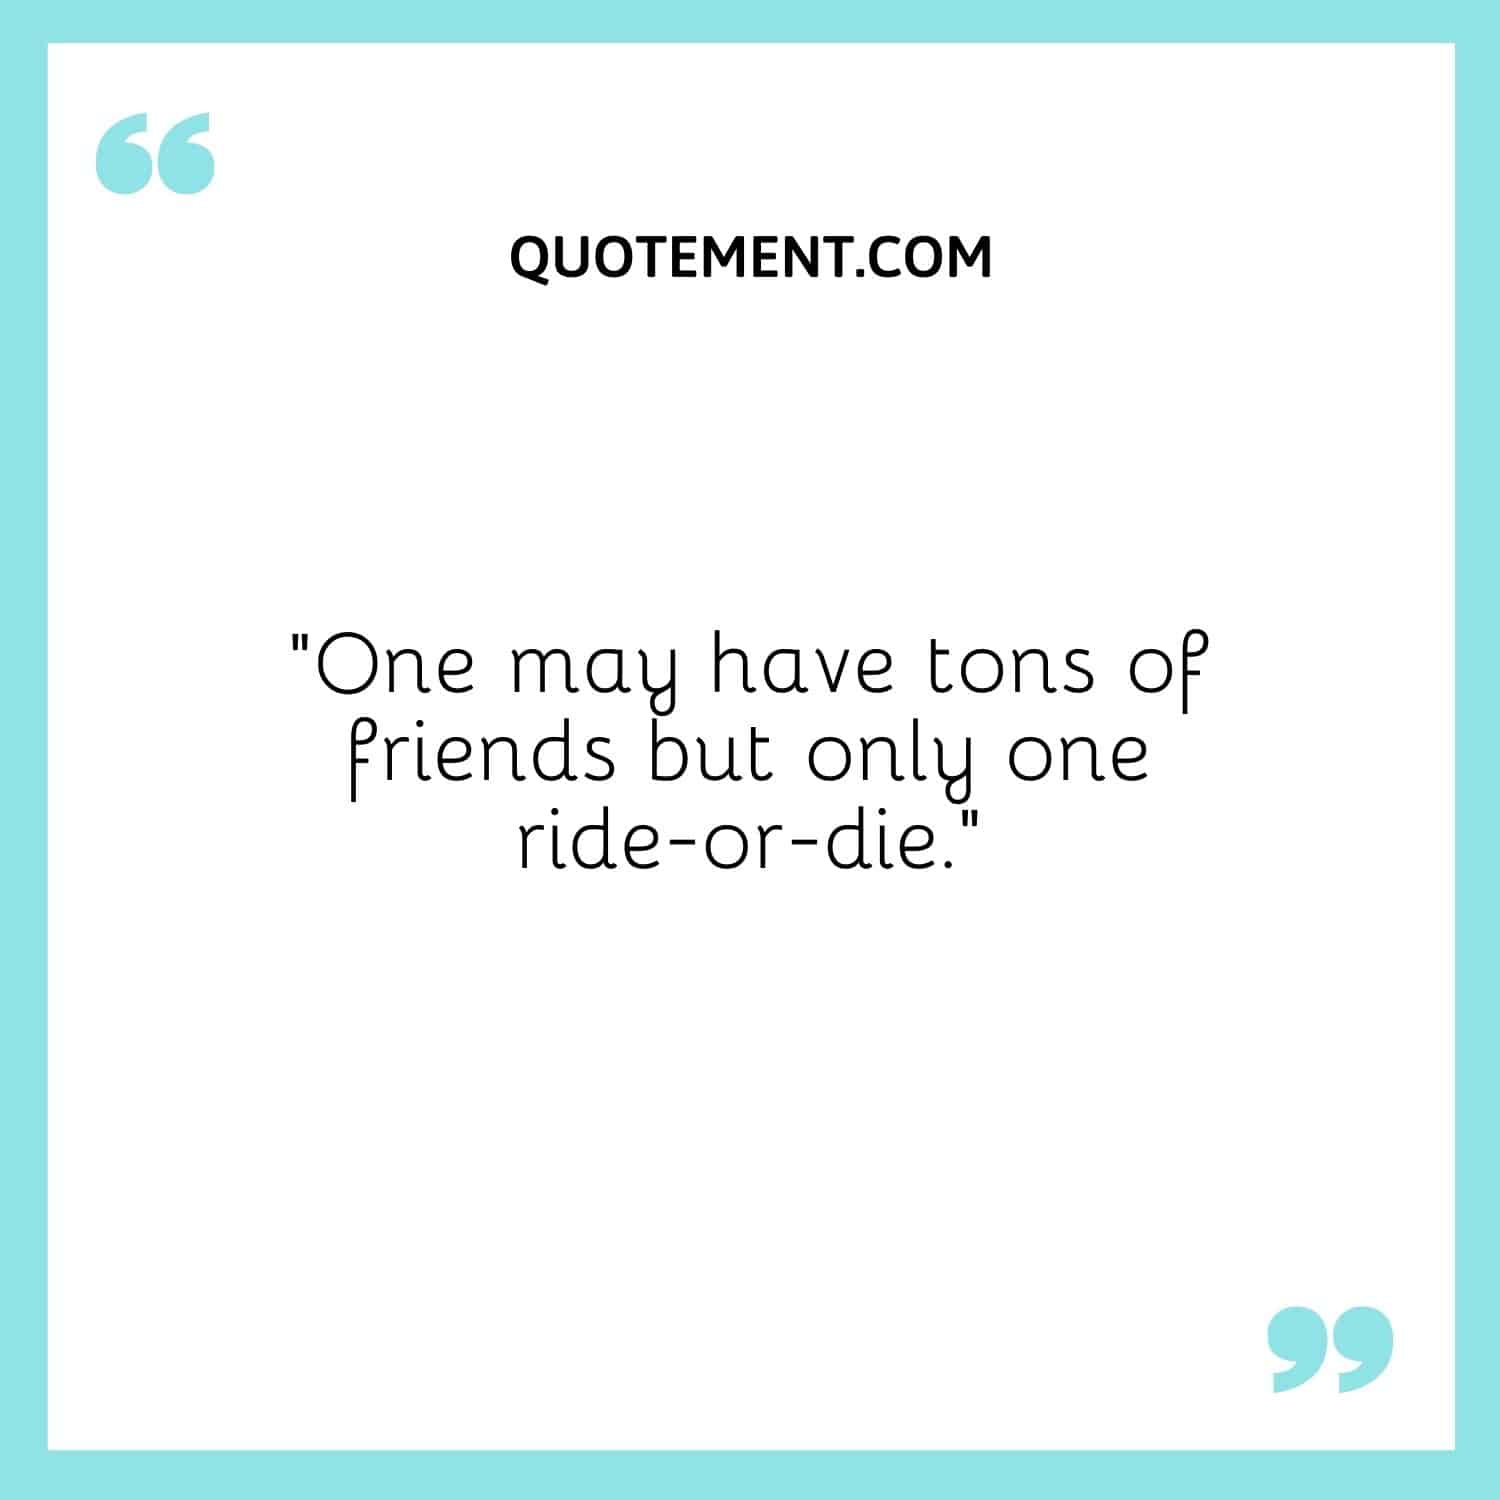 One may have tons of friends but only one ride-or-die.